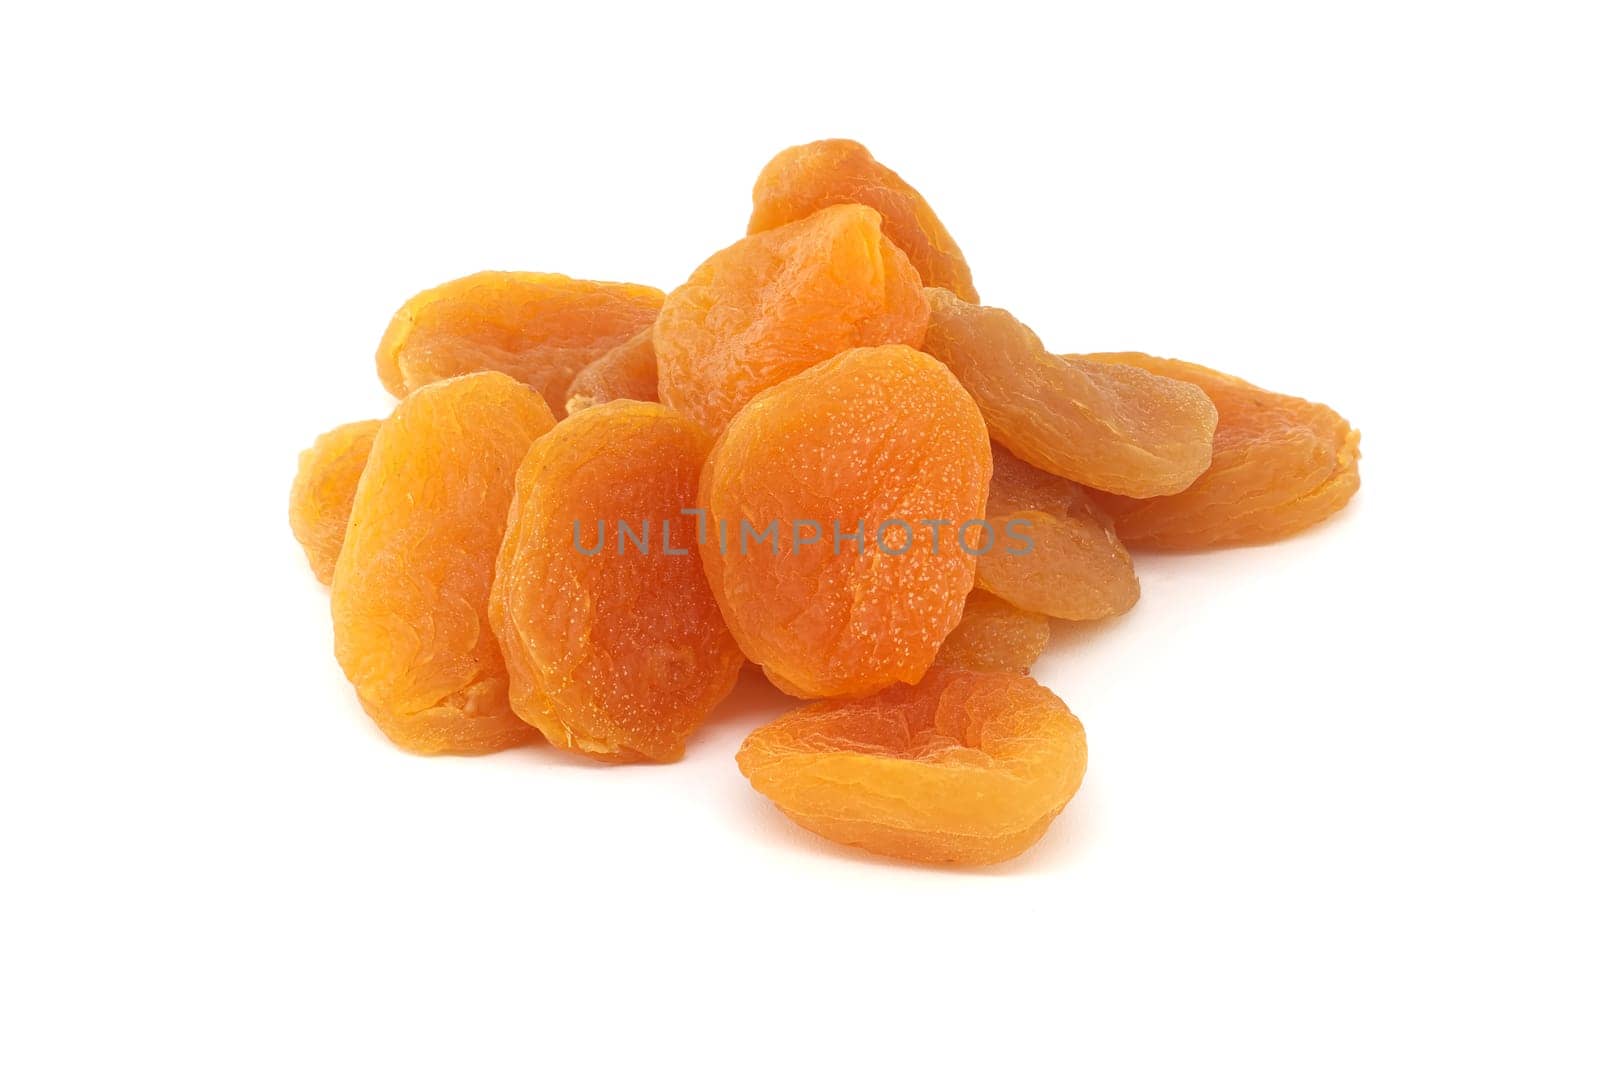 Bunch of dried apricots fruits isolated on white background